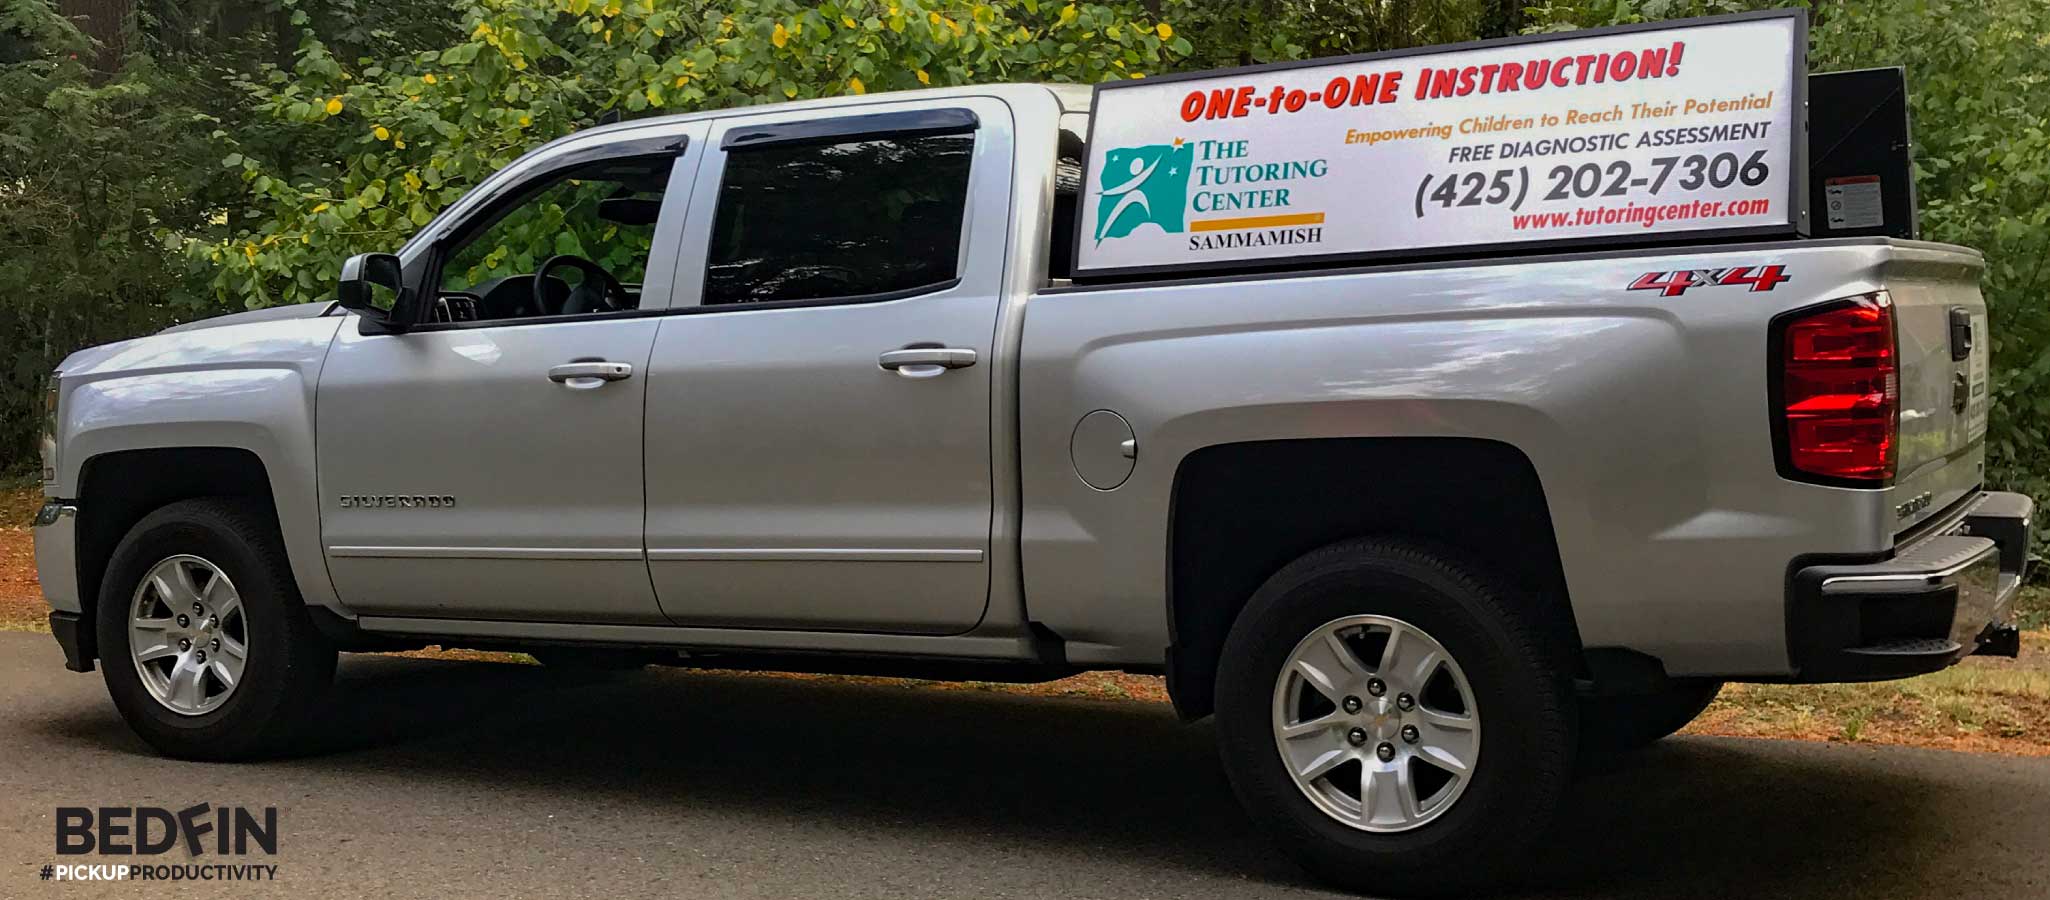 The Tutoring Center in Sammamish, WA with Bedfin mobile billboards installed 